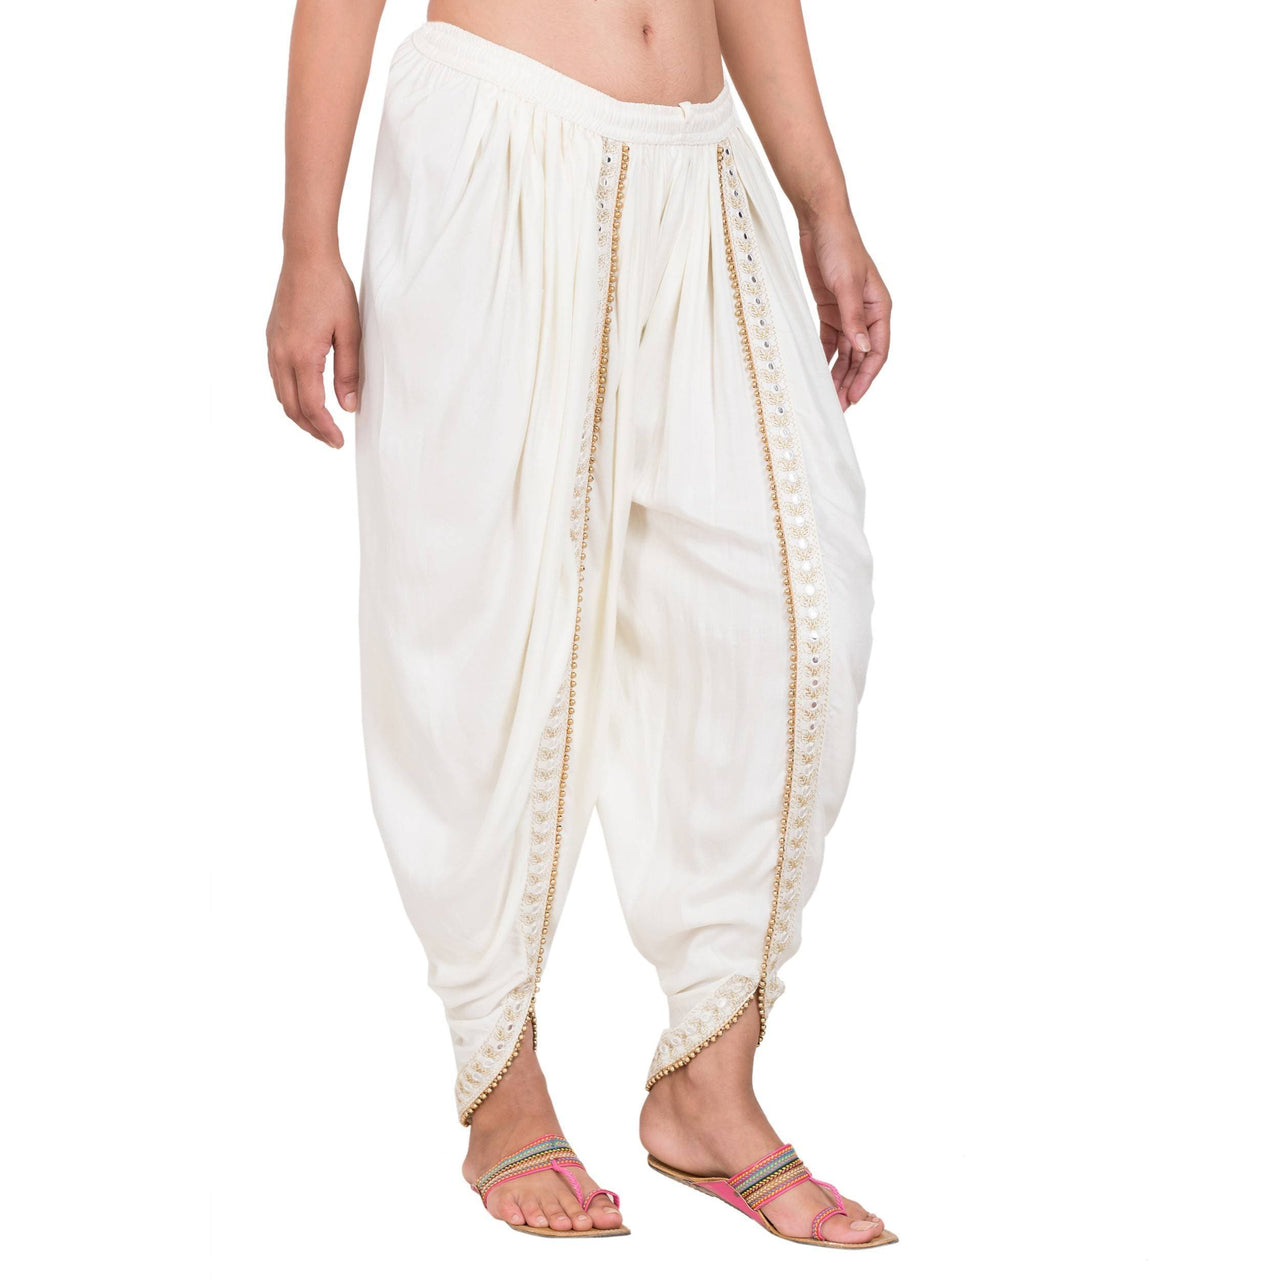 Asmaani Offwhite color Dhoti Patiala with Embellished Border